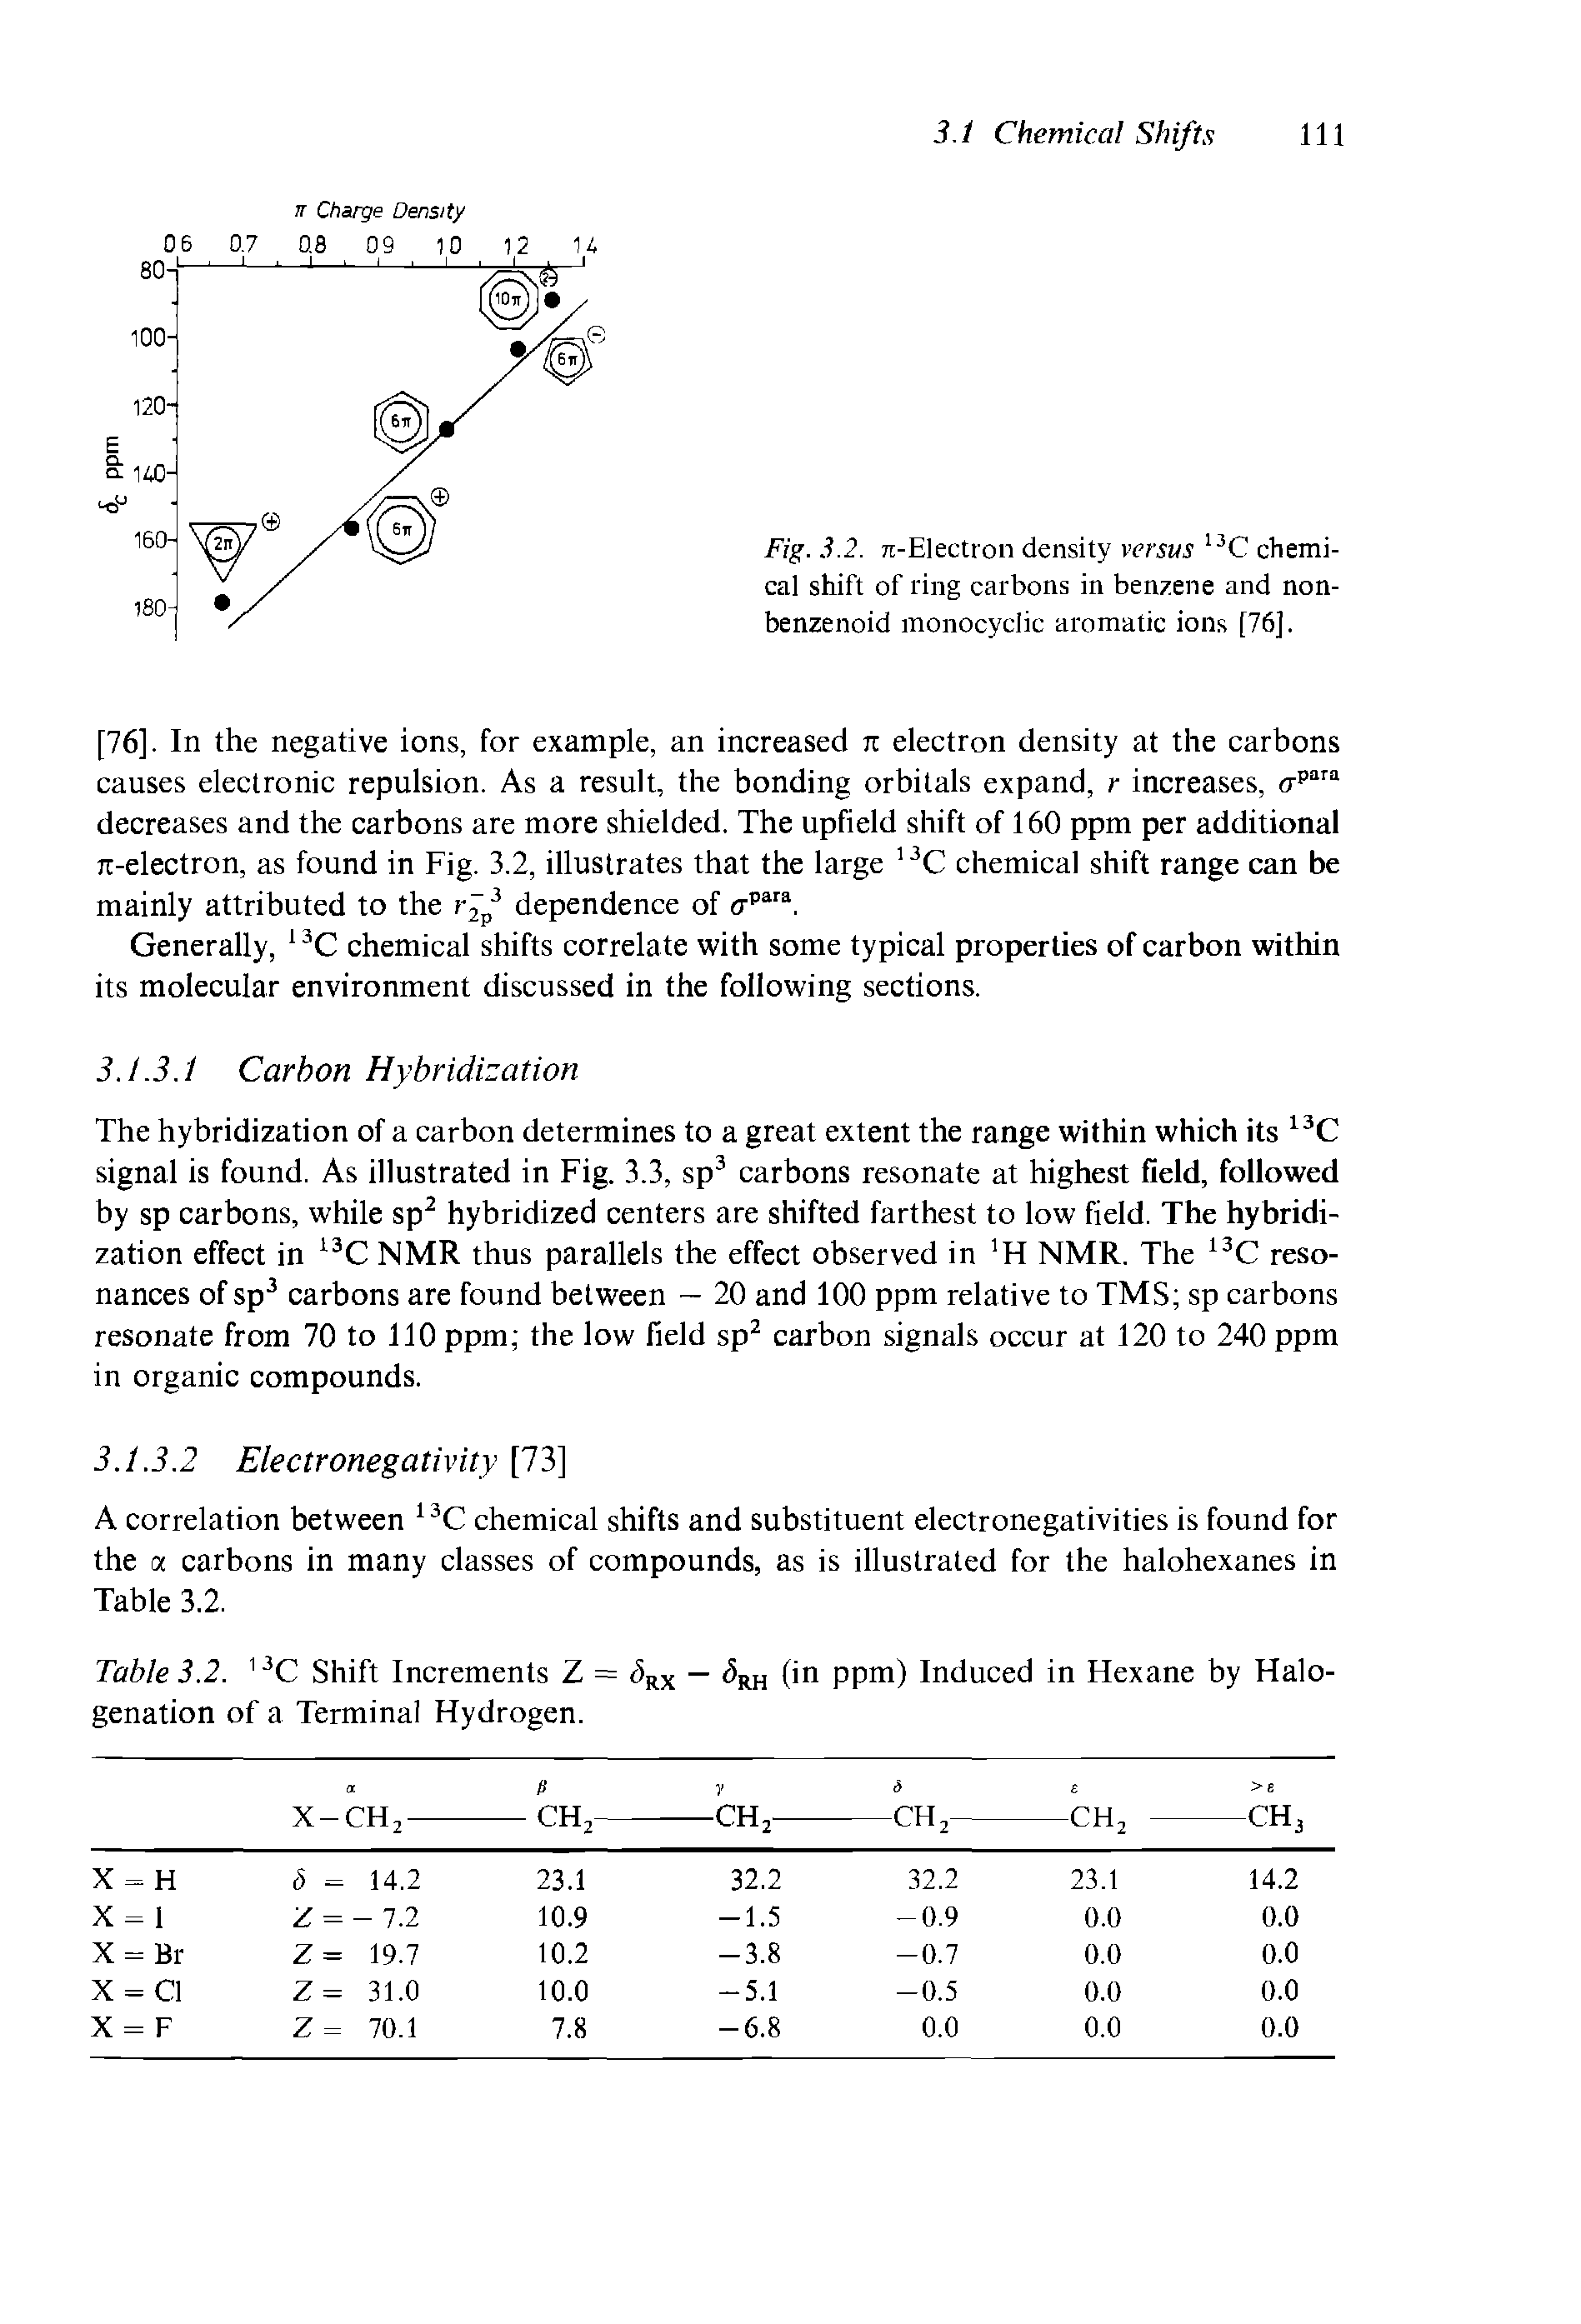 Fig. 3.2. 71-Electron density versus 13C chemical shift of ring carbons in benzene and non-benzenoid monocyclic aromatic ions [76],...